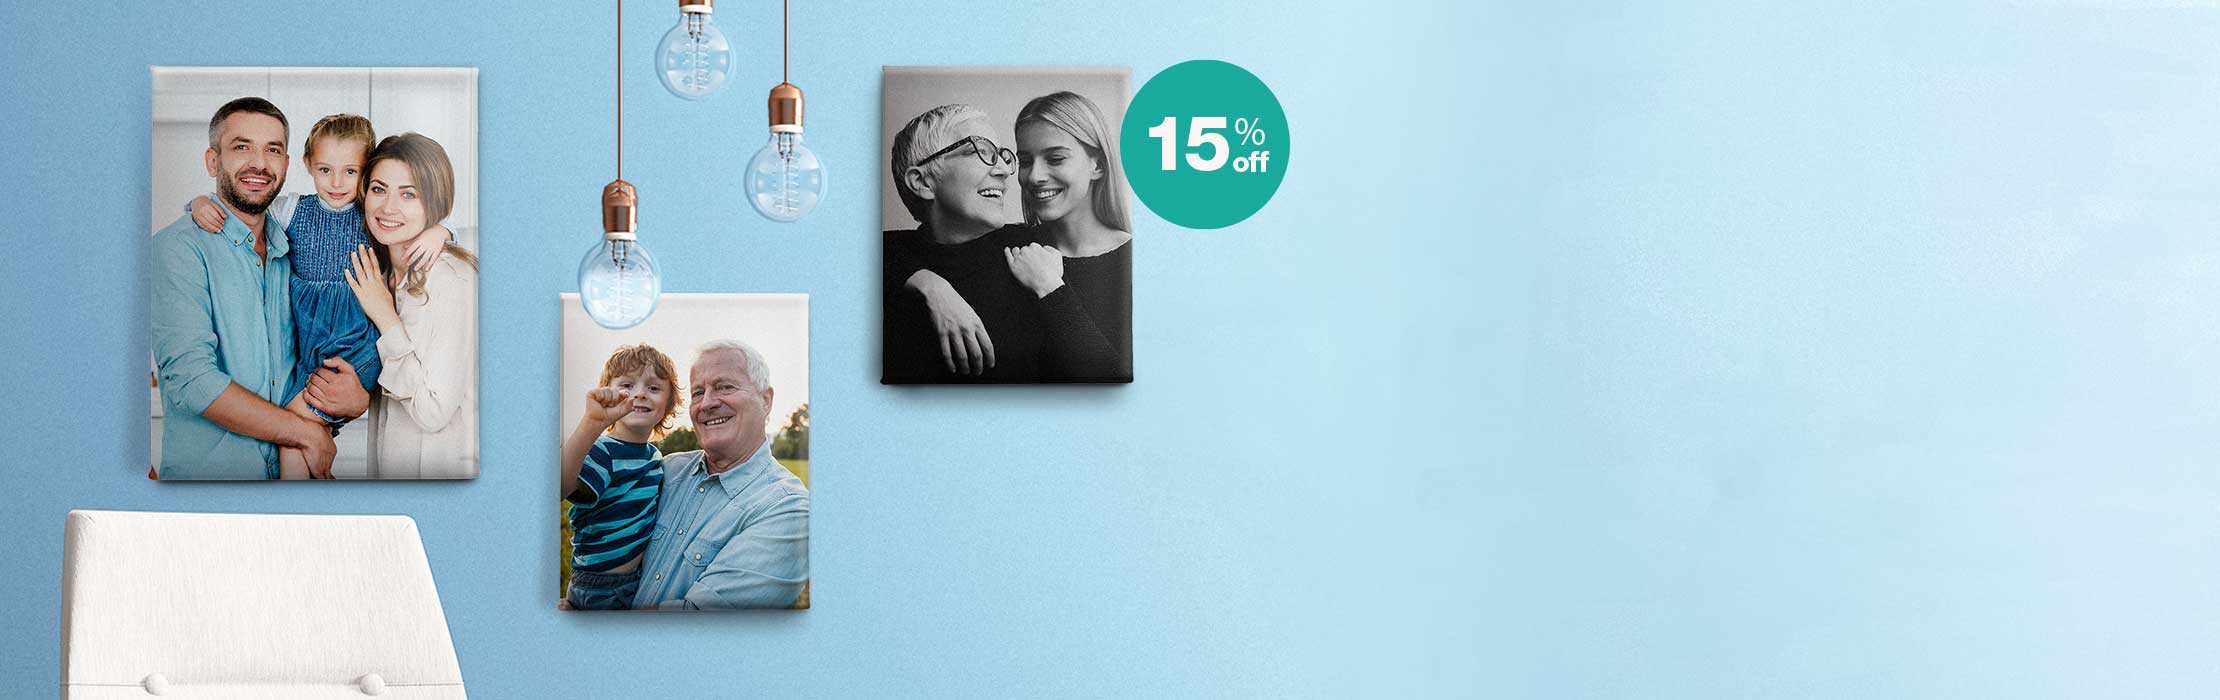 15% off sets. Voila! A home gallery wall